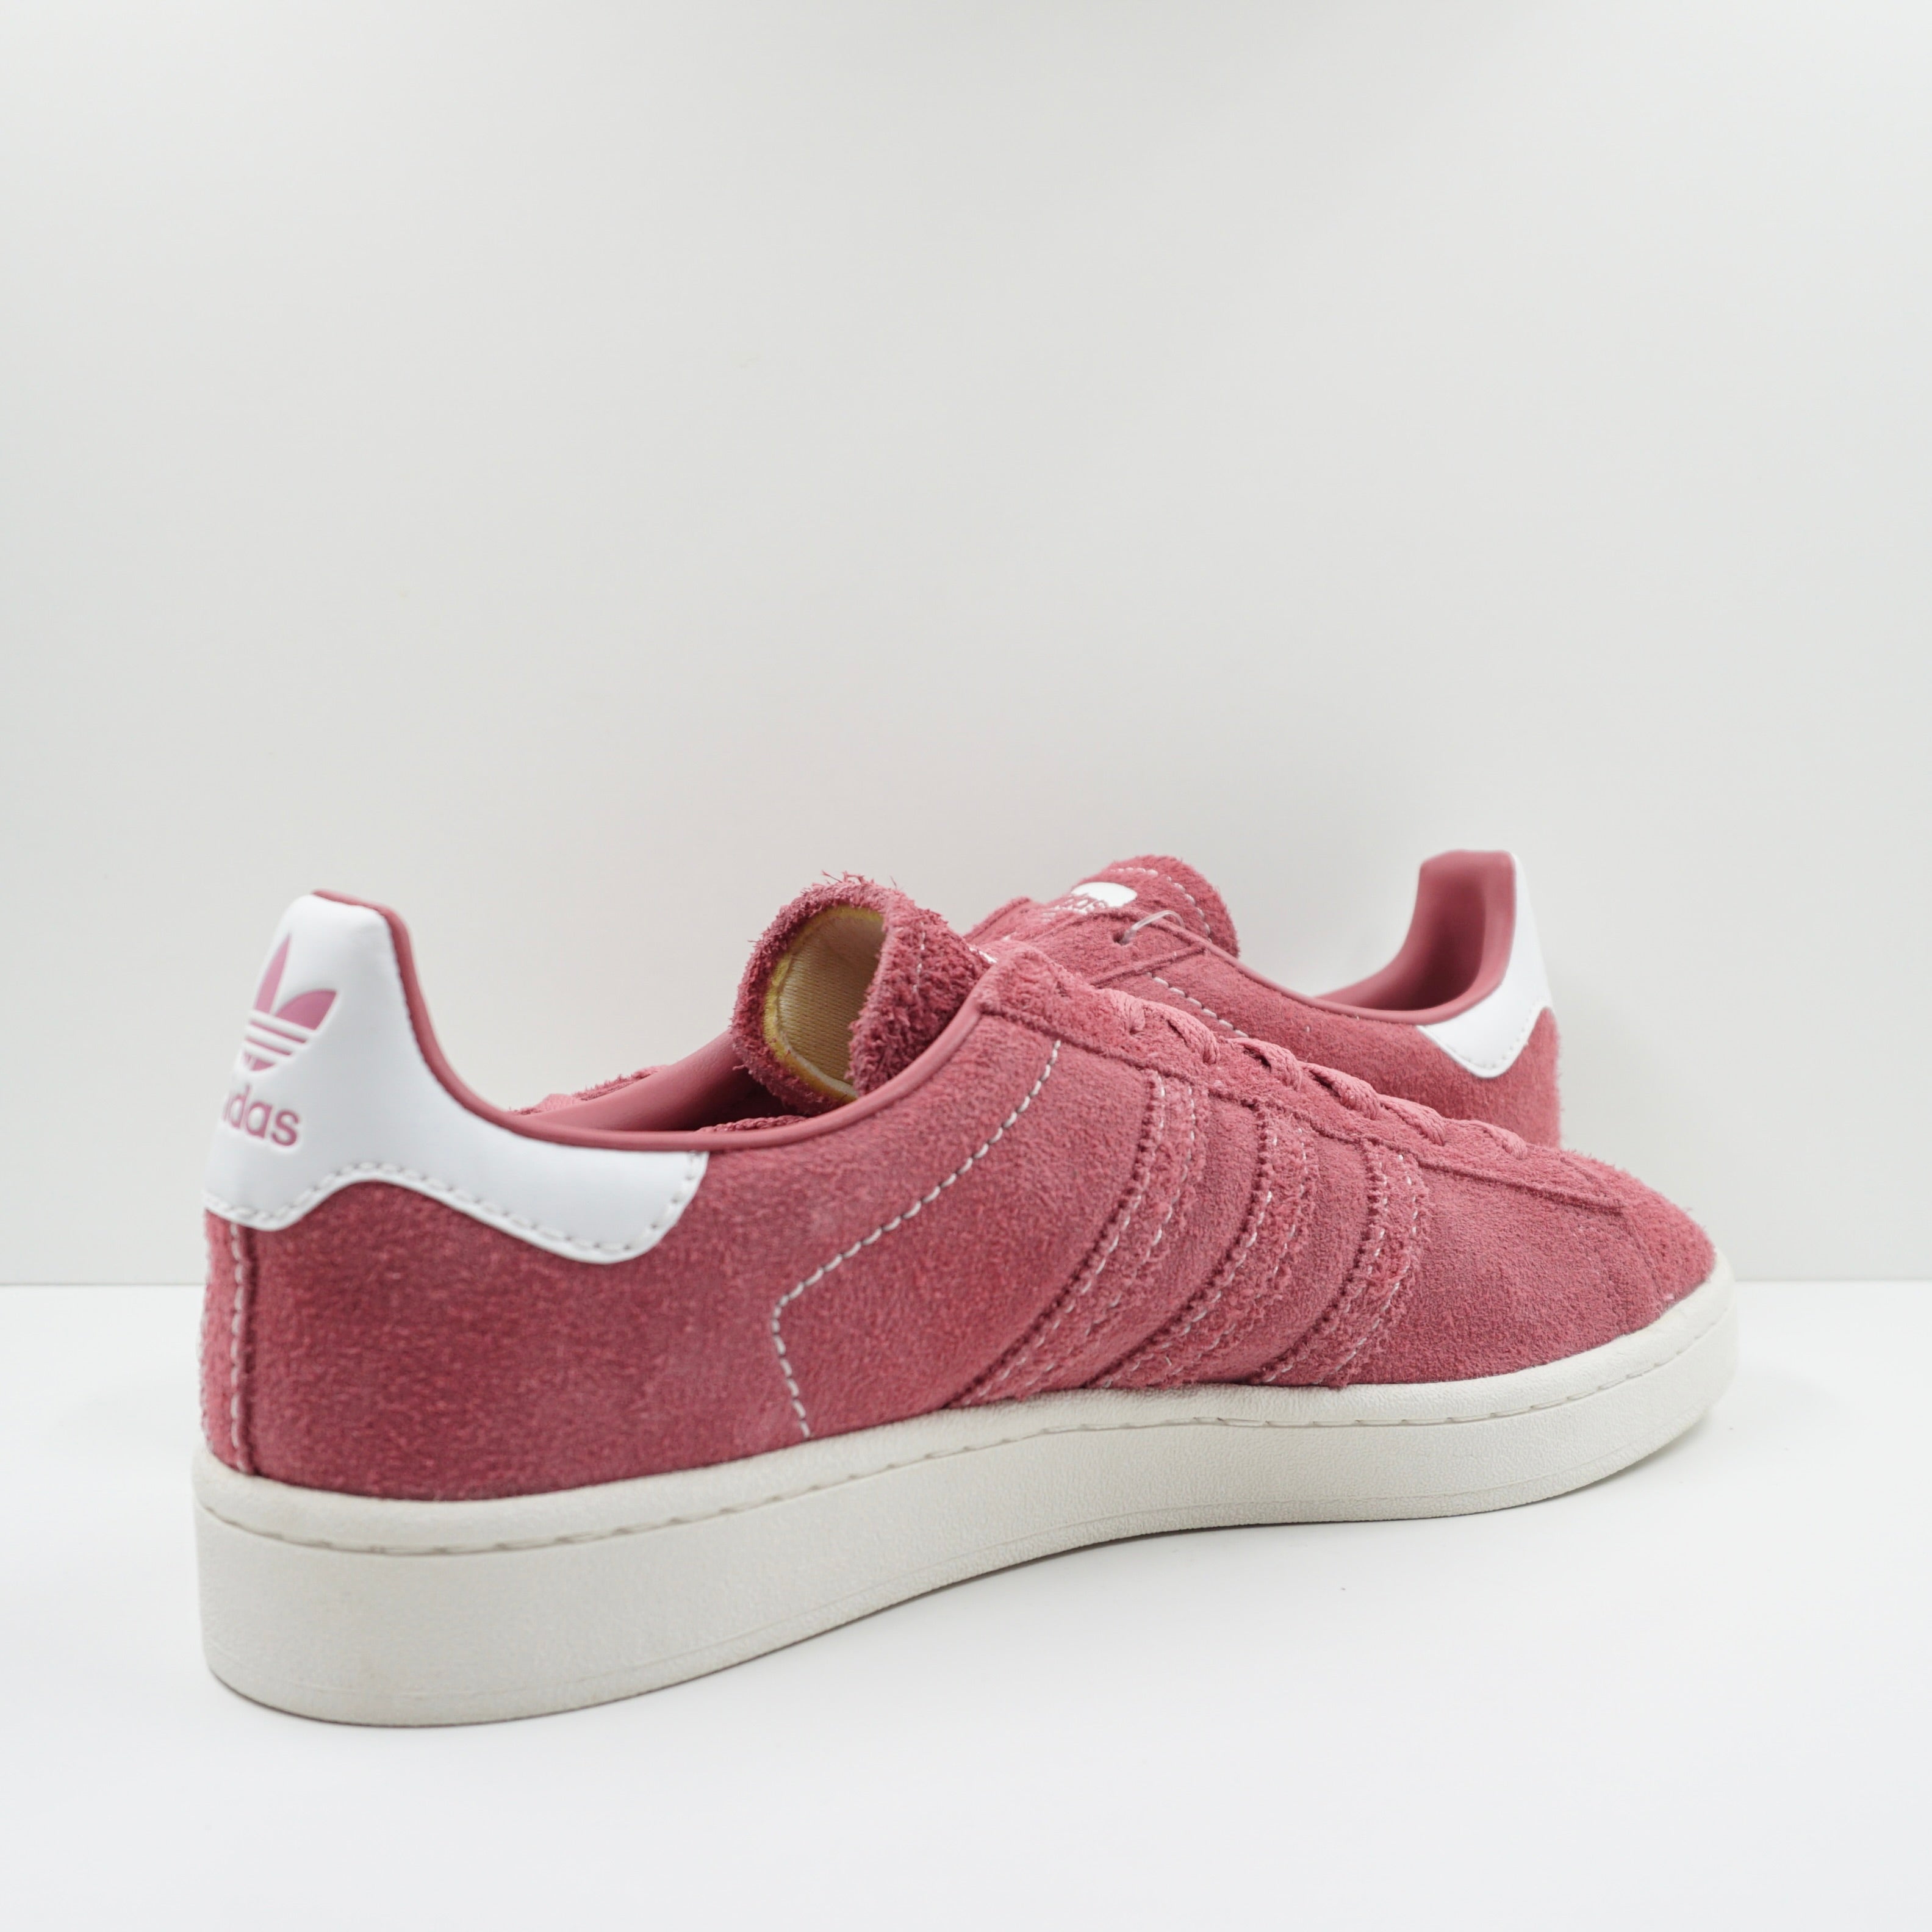 Adidas Campus Trace Maroon White